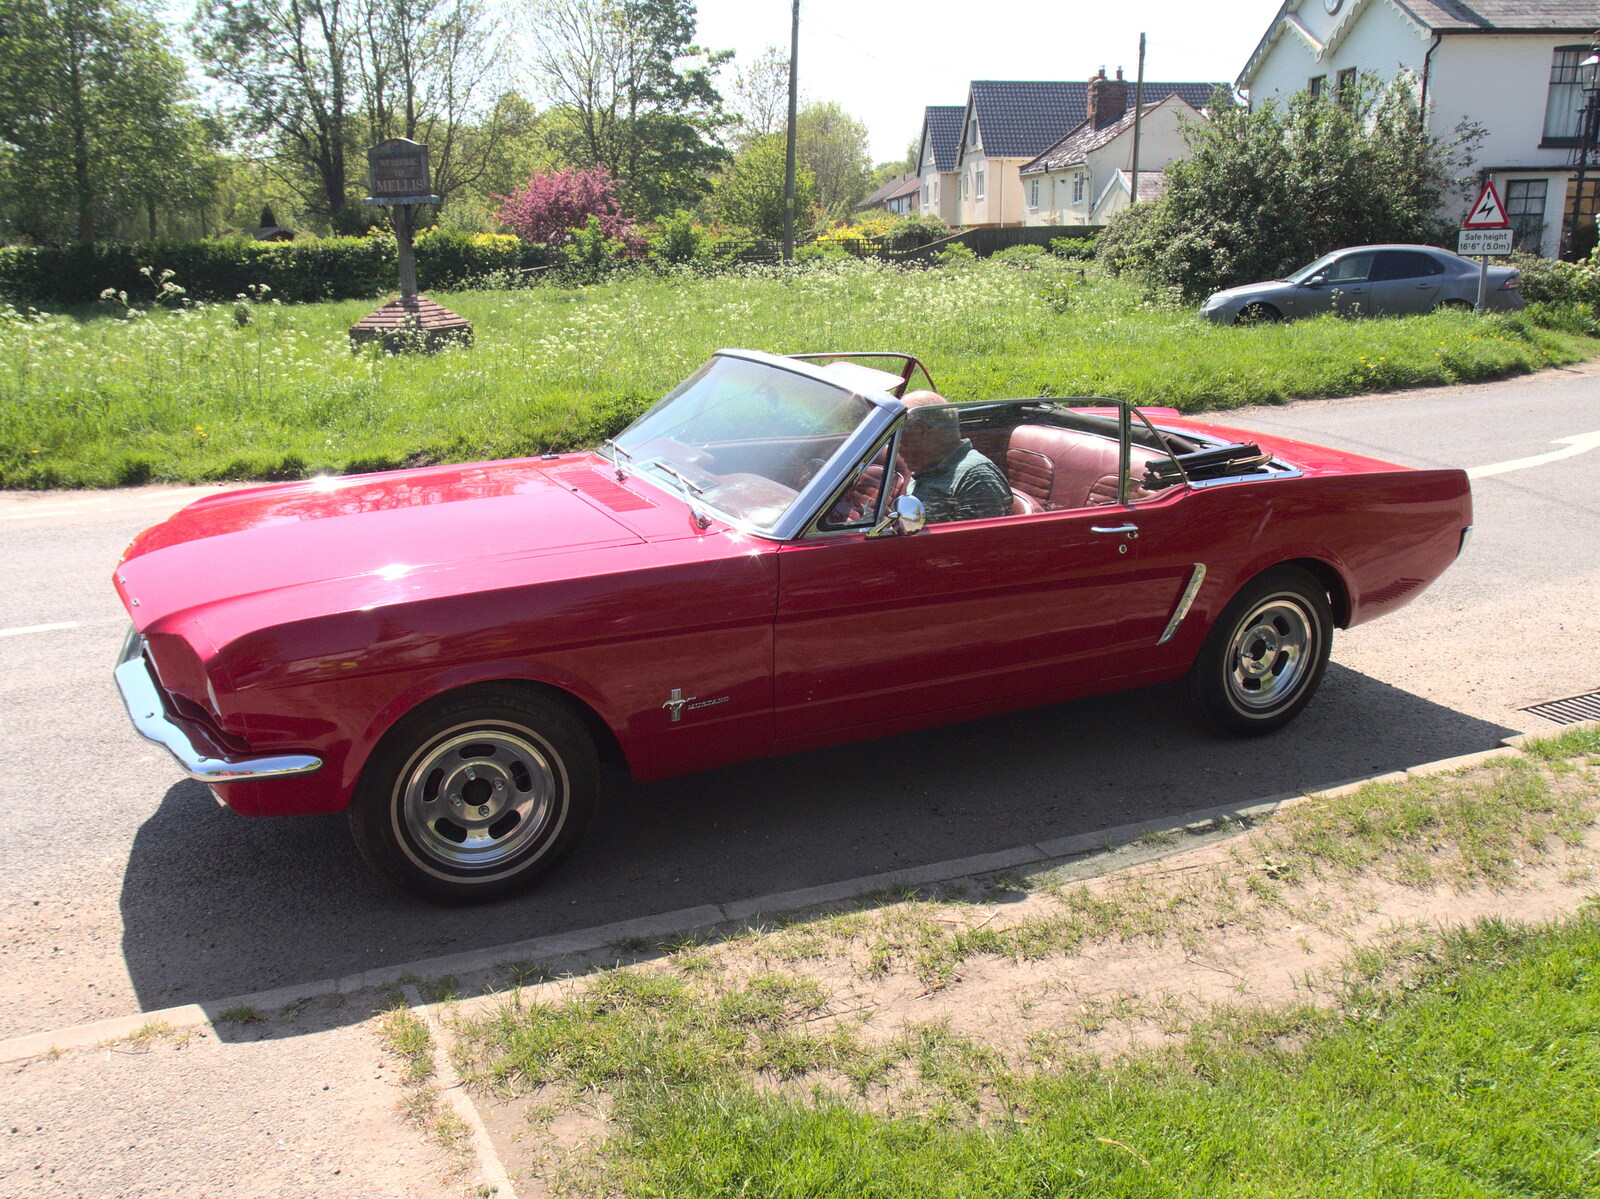 There's a nice old Ford Mustang outside from A Bike Ride to the Railway Tavern, Mellis, Suffolk - 7th May 2018